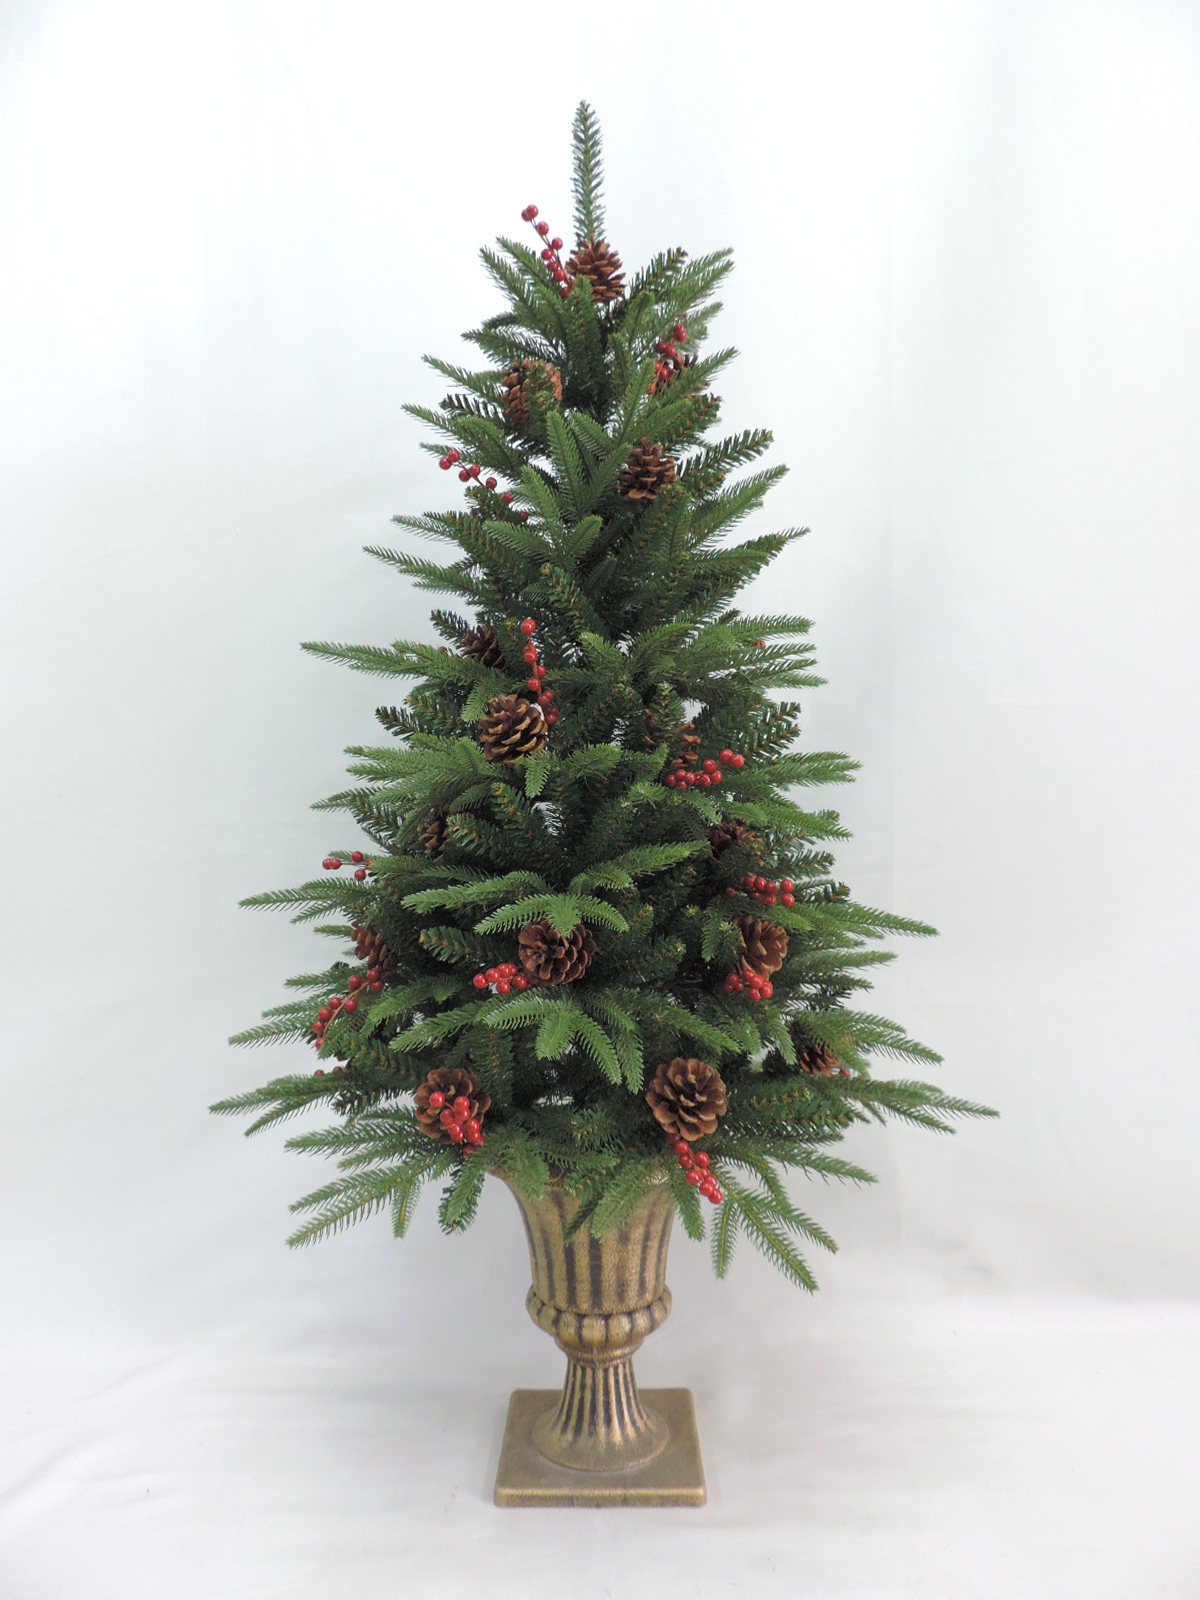 Factory-Made Artificial Christmas Pot Tree: Home Wedding Decoration Ornament, Gifts - 4ft/19-PT3